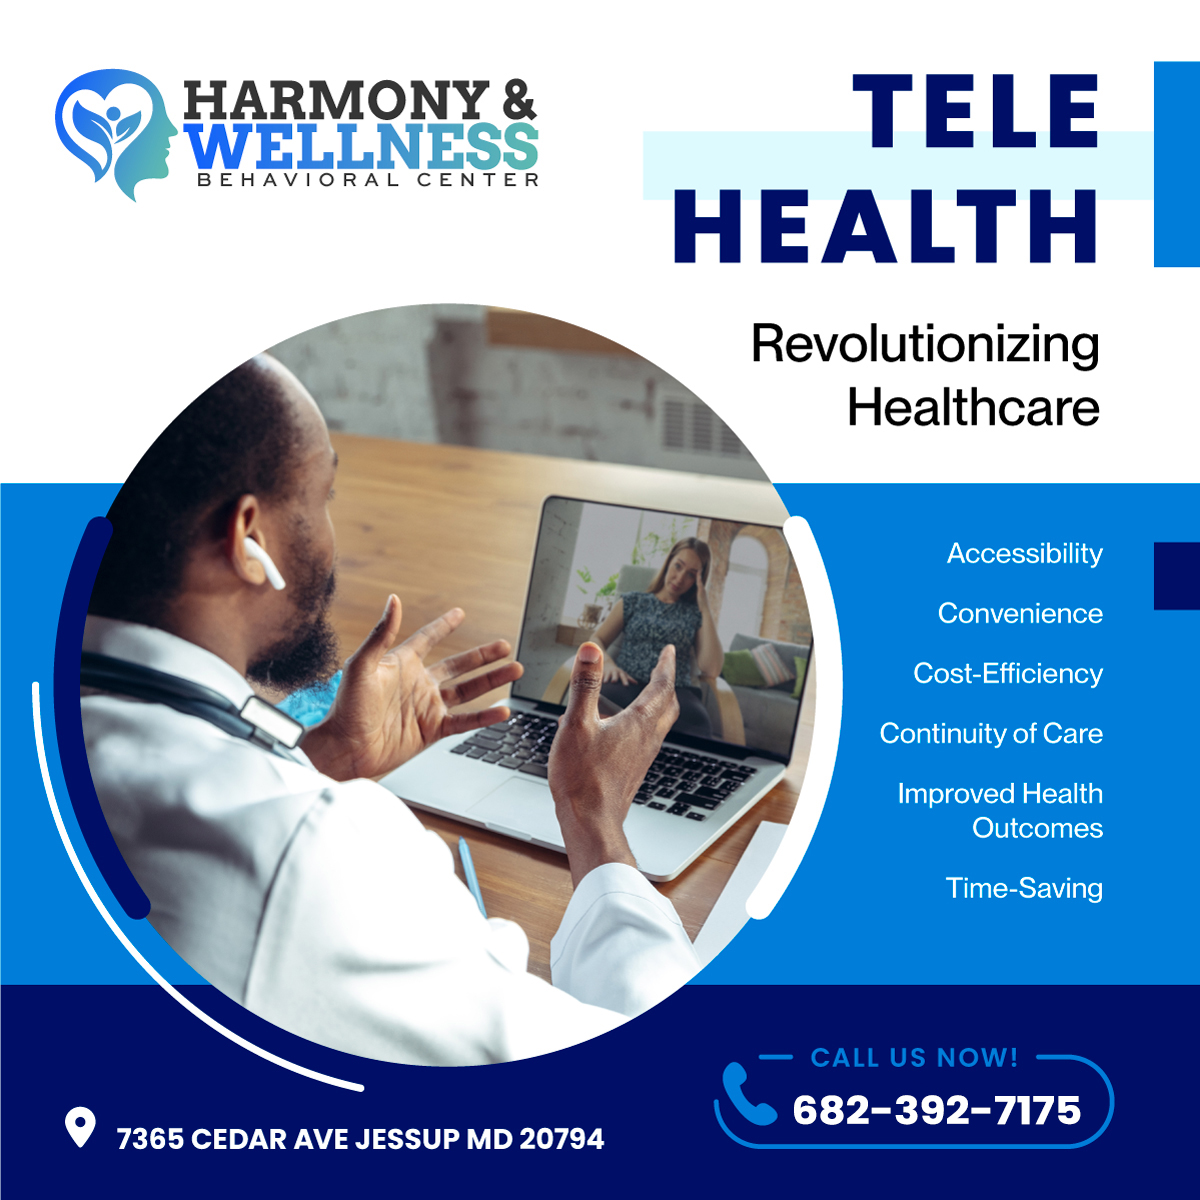 Health on Your Terms!
Telehealth Brings You Accessibility, Convenience, and Continuity of Care. Embrace a New Era of Improved Health Outcomes and Time-saving Solutions.
#HarmonyWellnessPoint #TelehealthRevolution #HealthOnYourTerms #AccessibleHealthcare #ConvenientCare